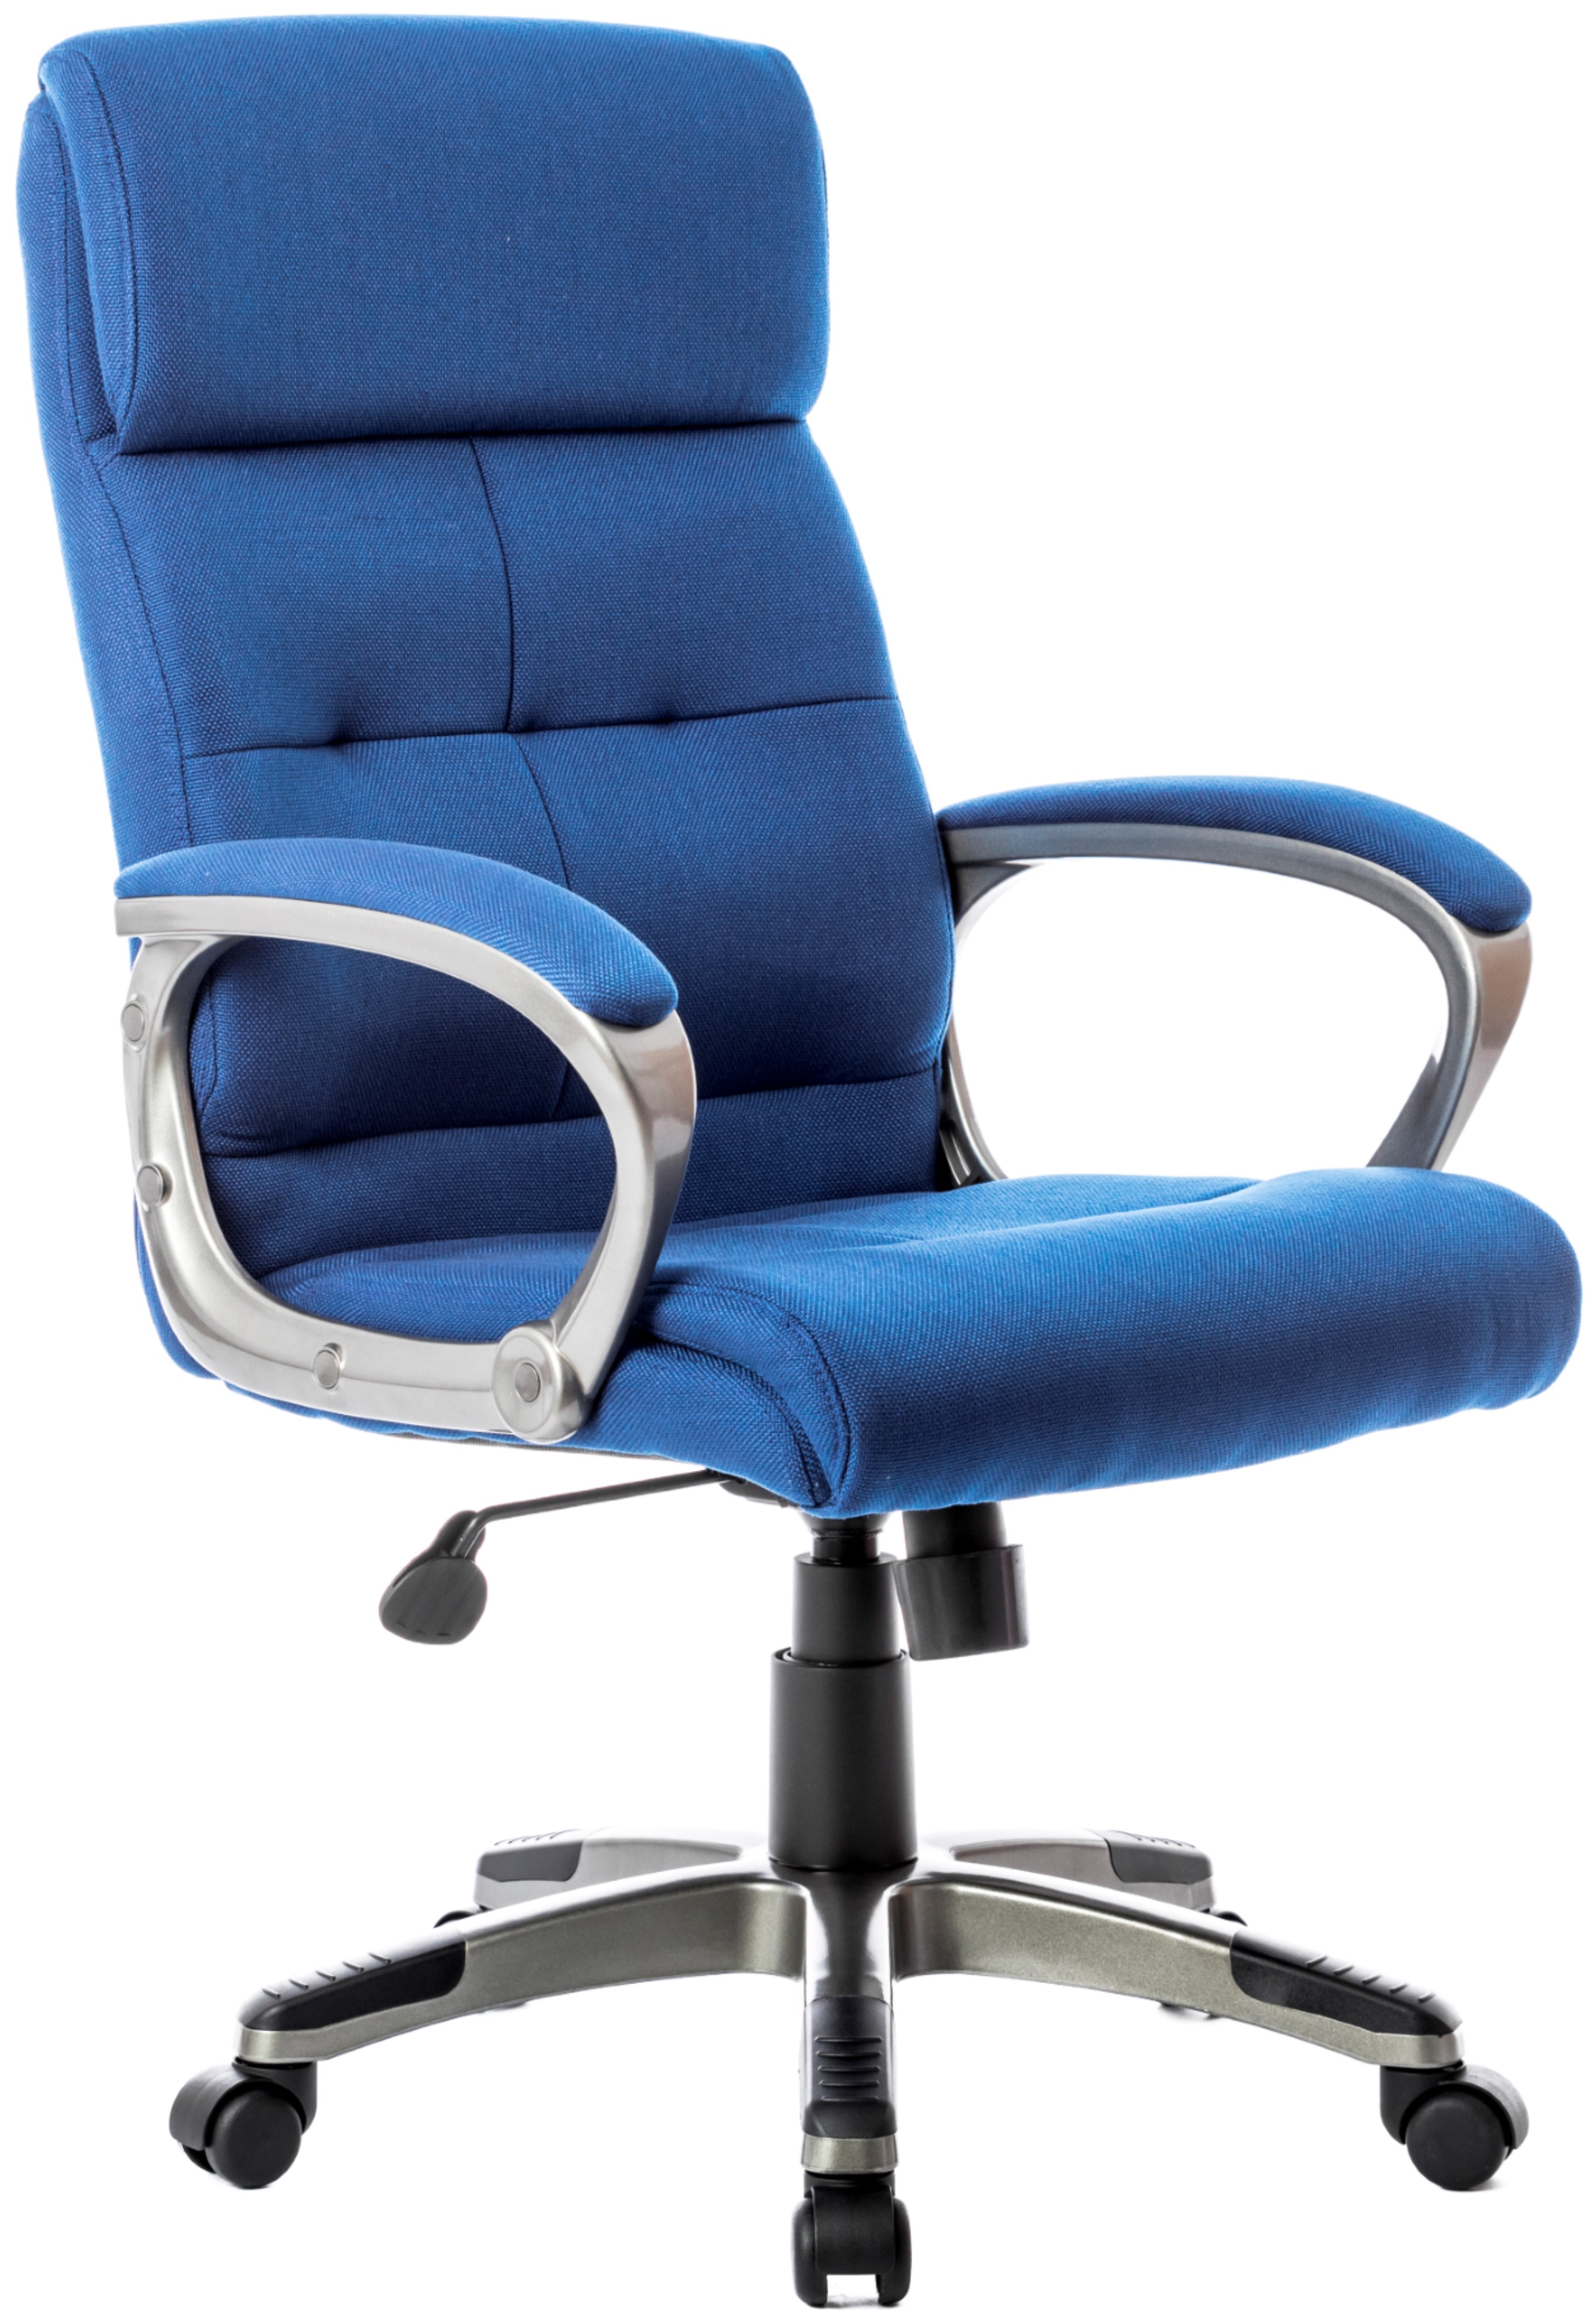 Executive Blue Office Chairs Blue Desk Chairs